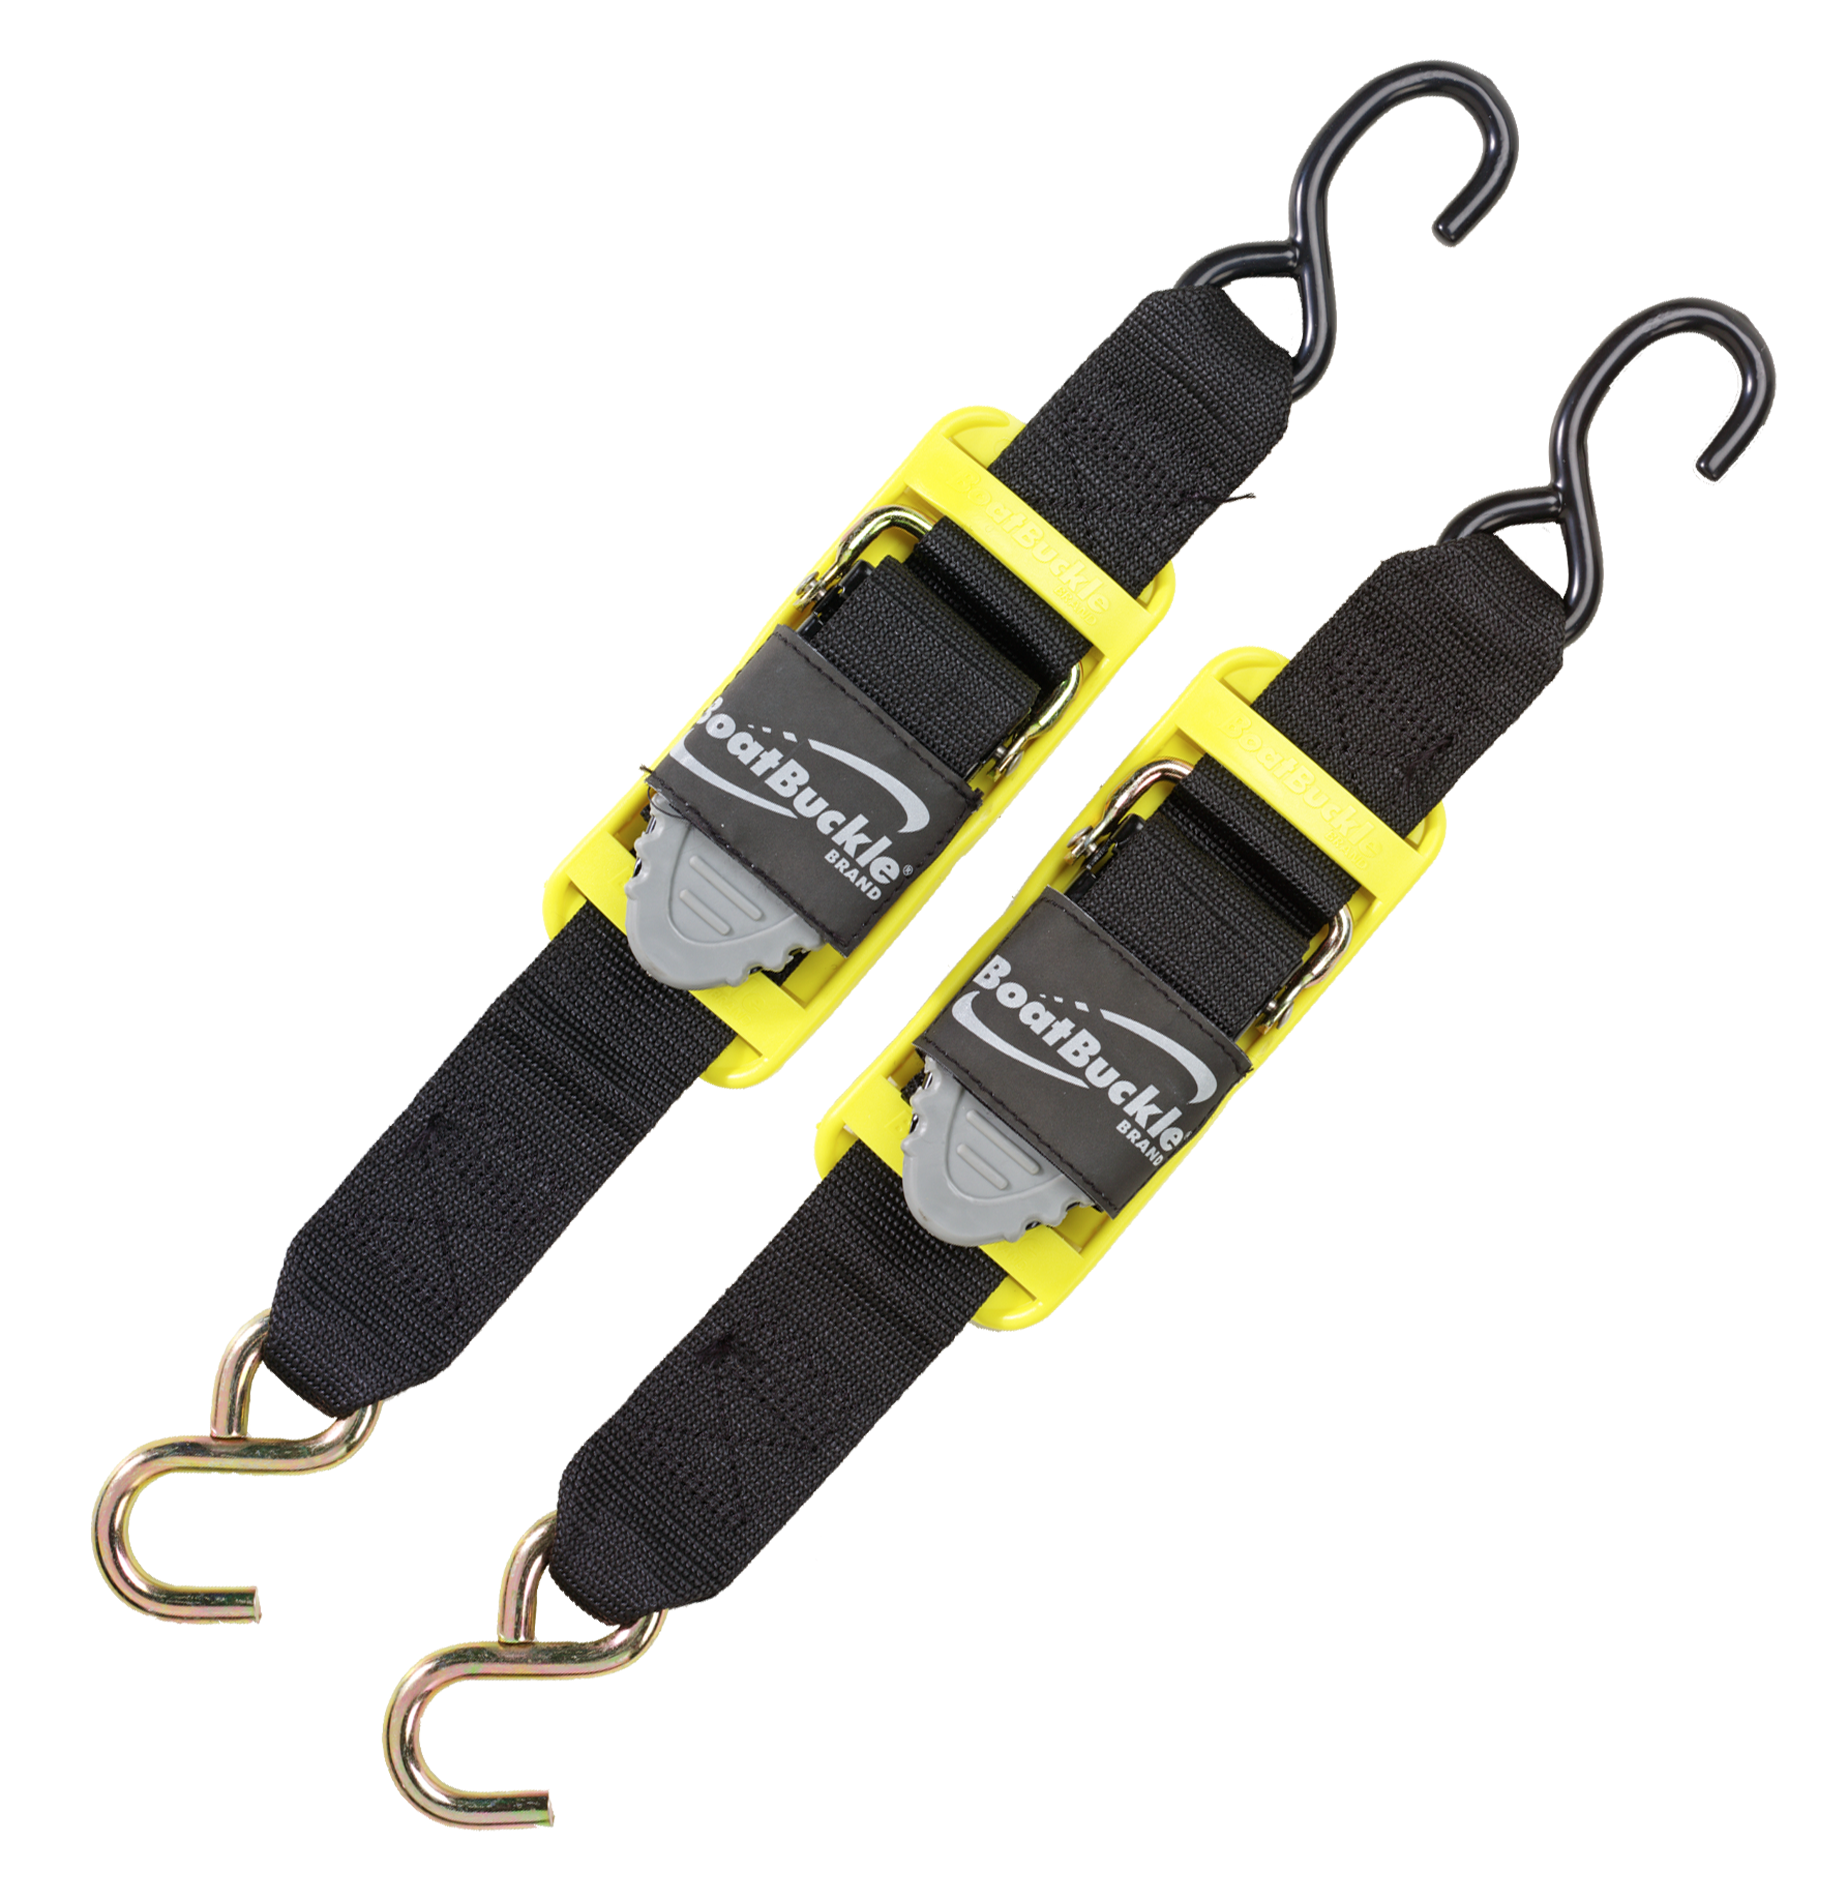 BoatBuckle Pro Series Transom Tie-Down 2-Pack